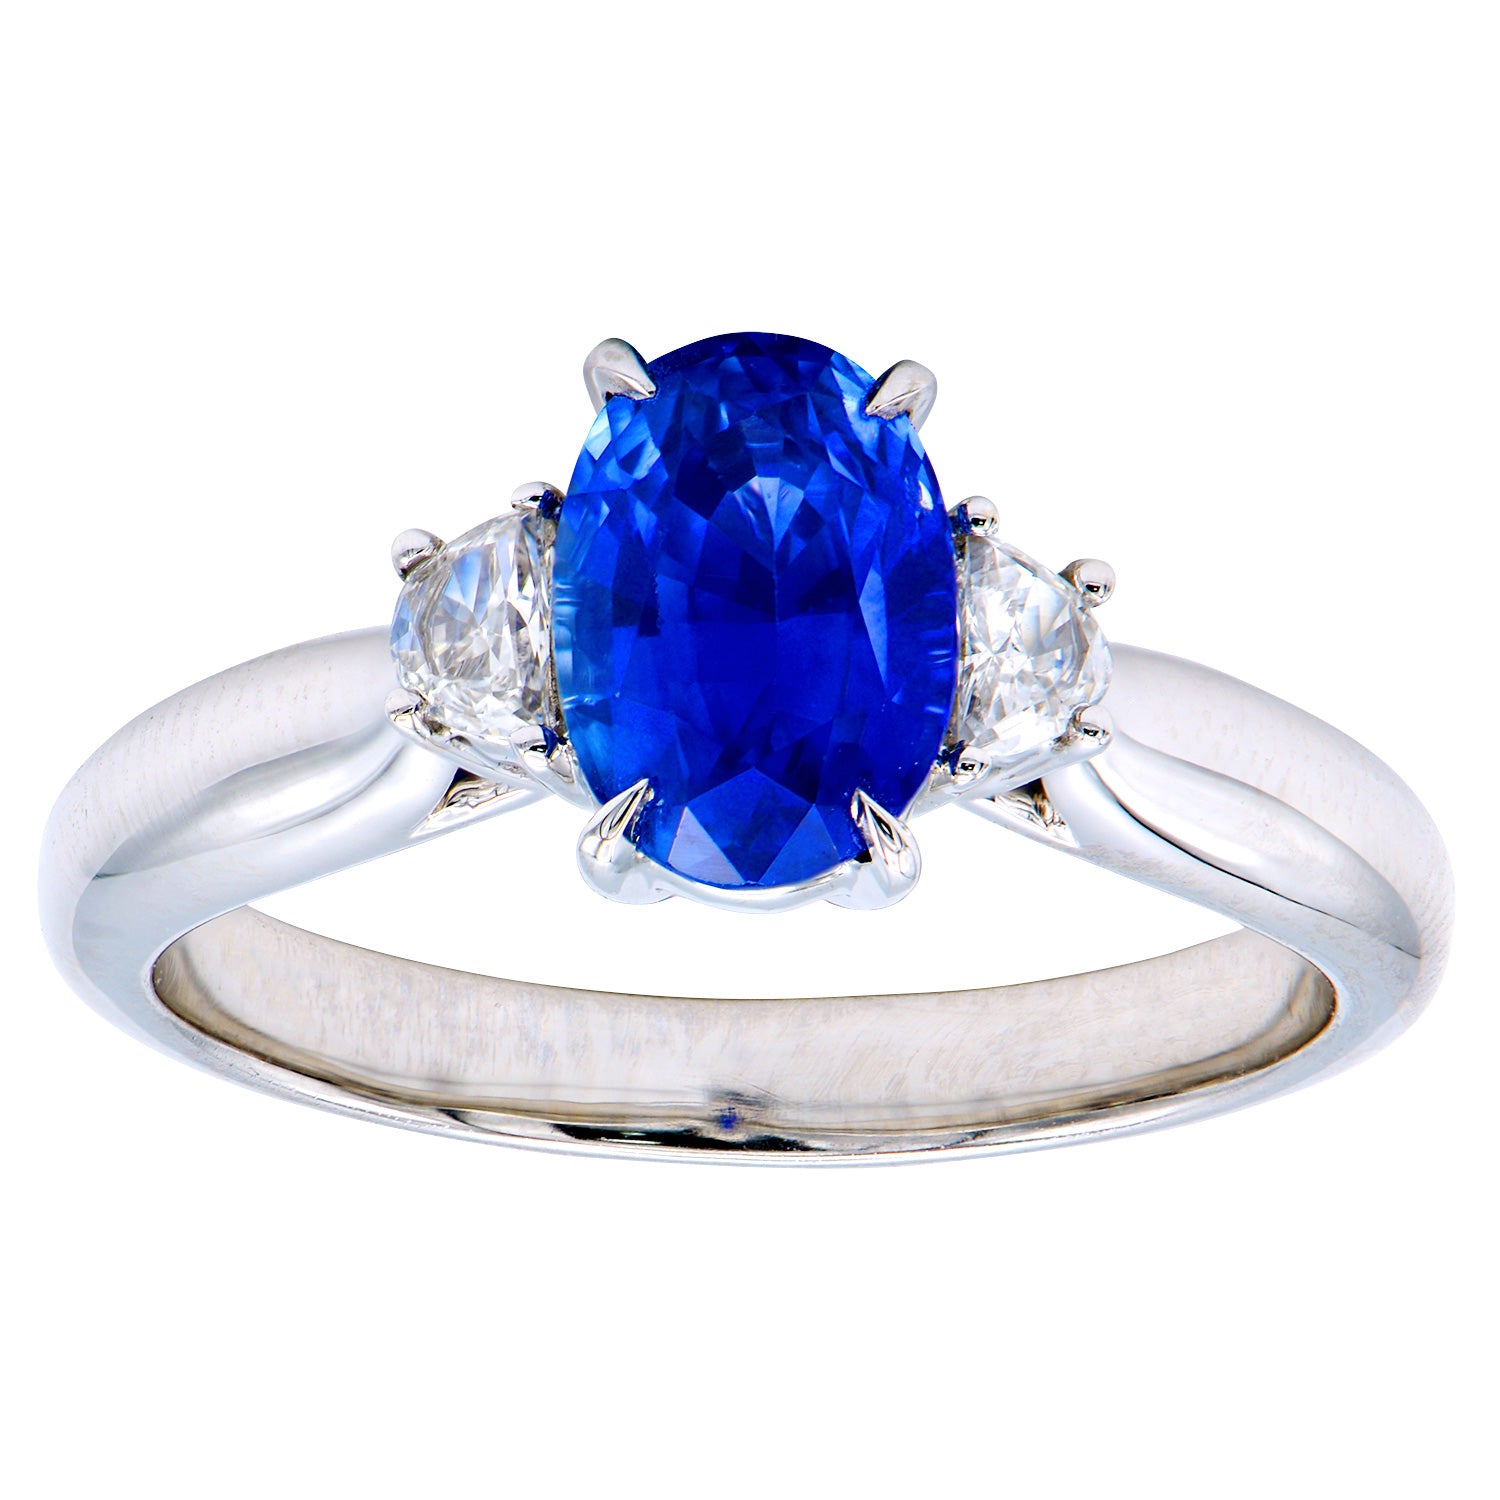 18KW Blue Sapphire Ring, 9-15mm